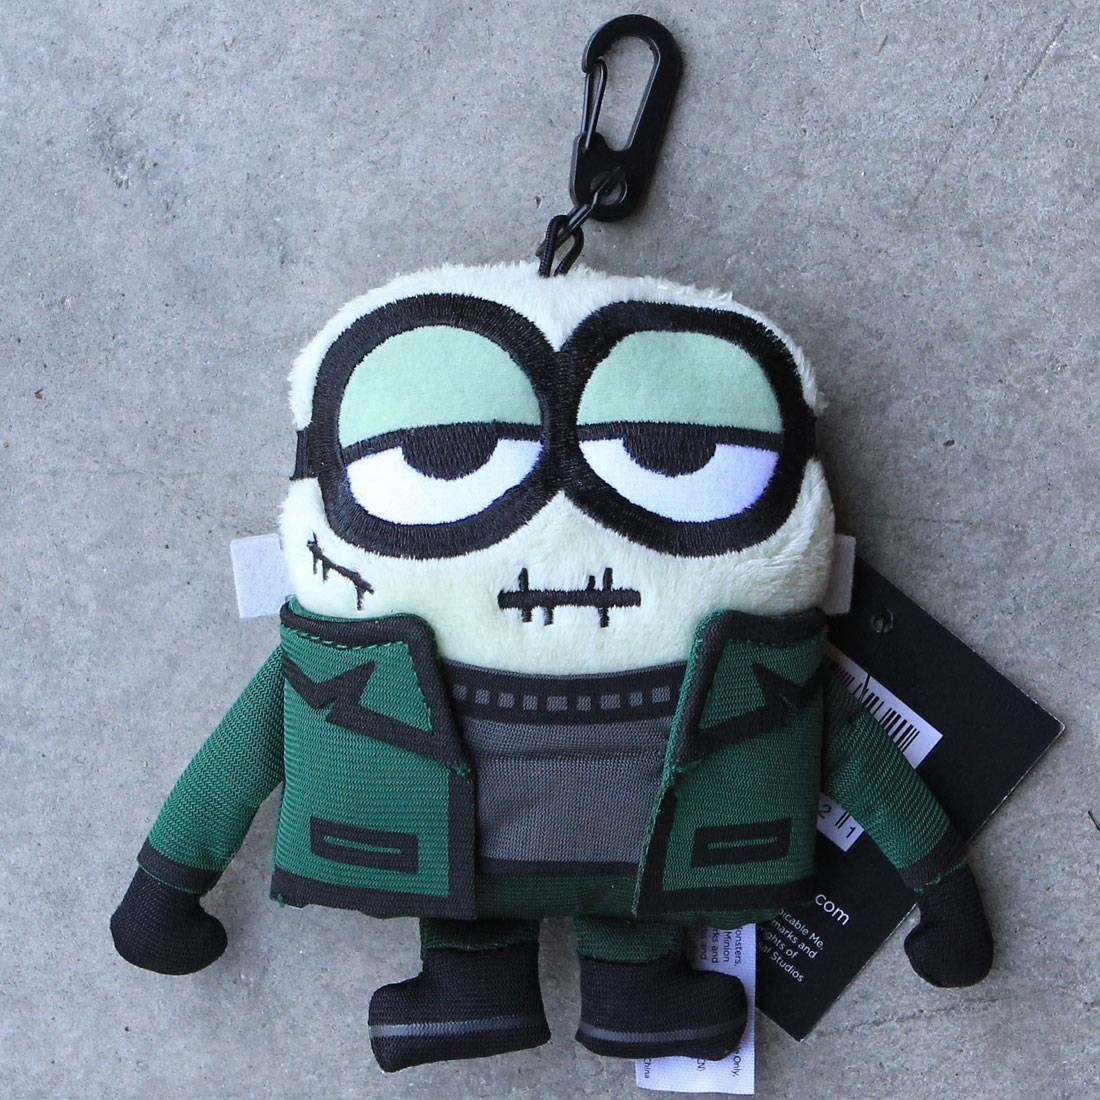 BAIT x Minion Monsters Zombie Tim 5 Inch Plush Backpack Clip Minions  Despicable Me